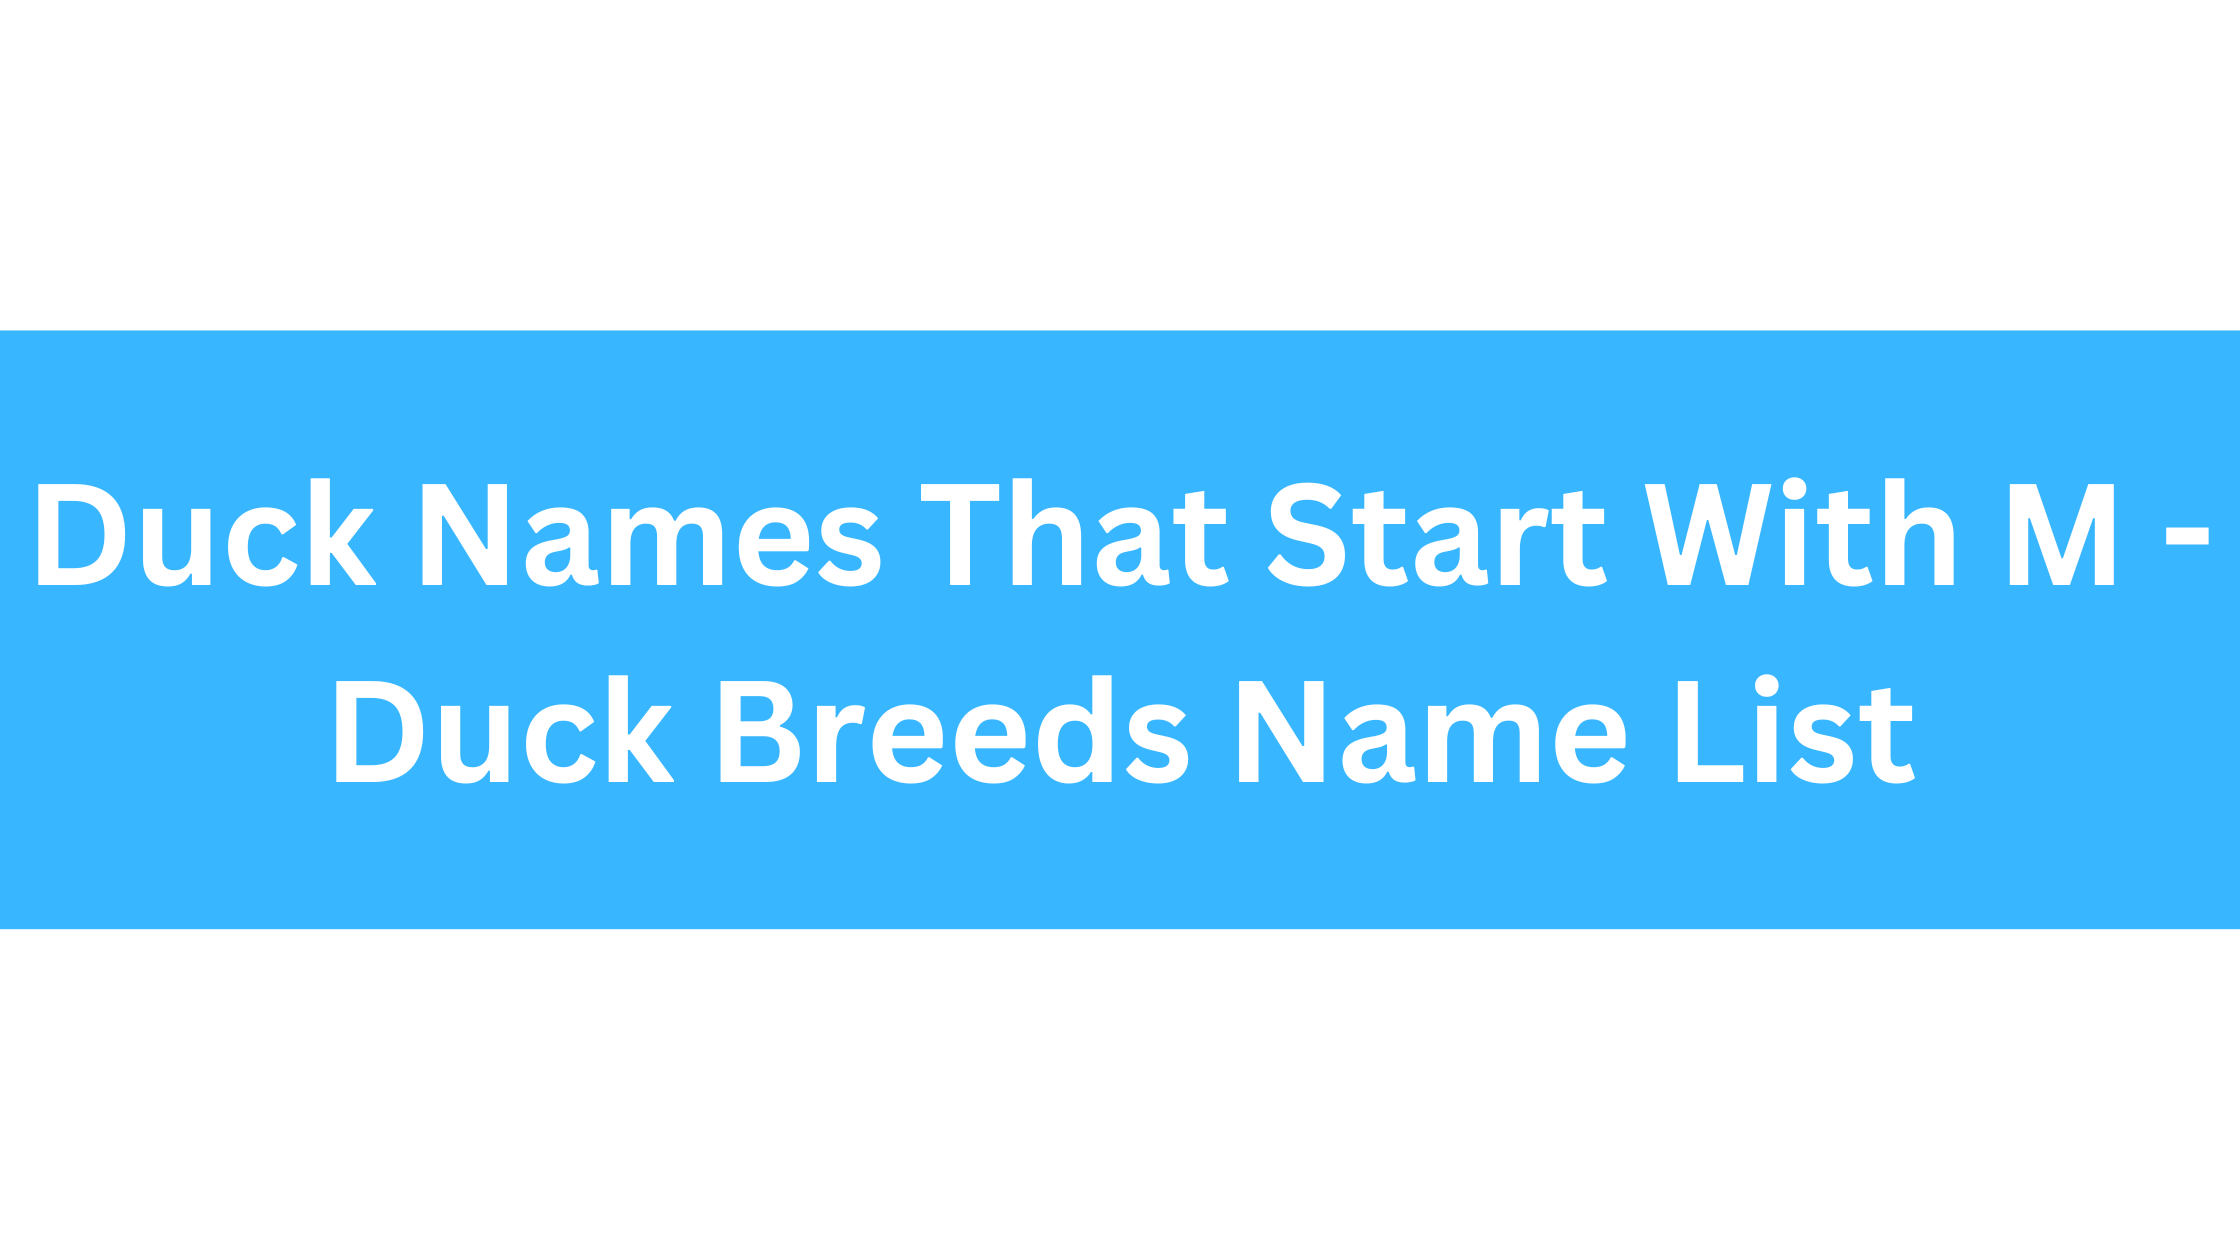 Duck Names That Start With M